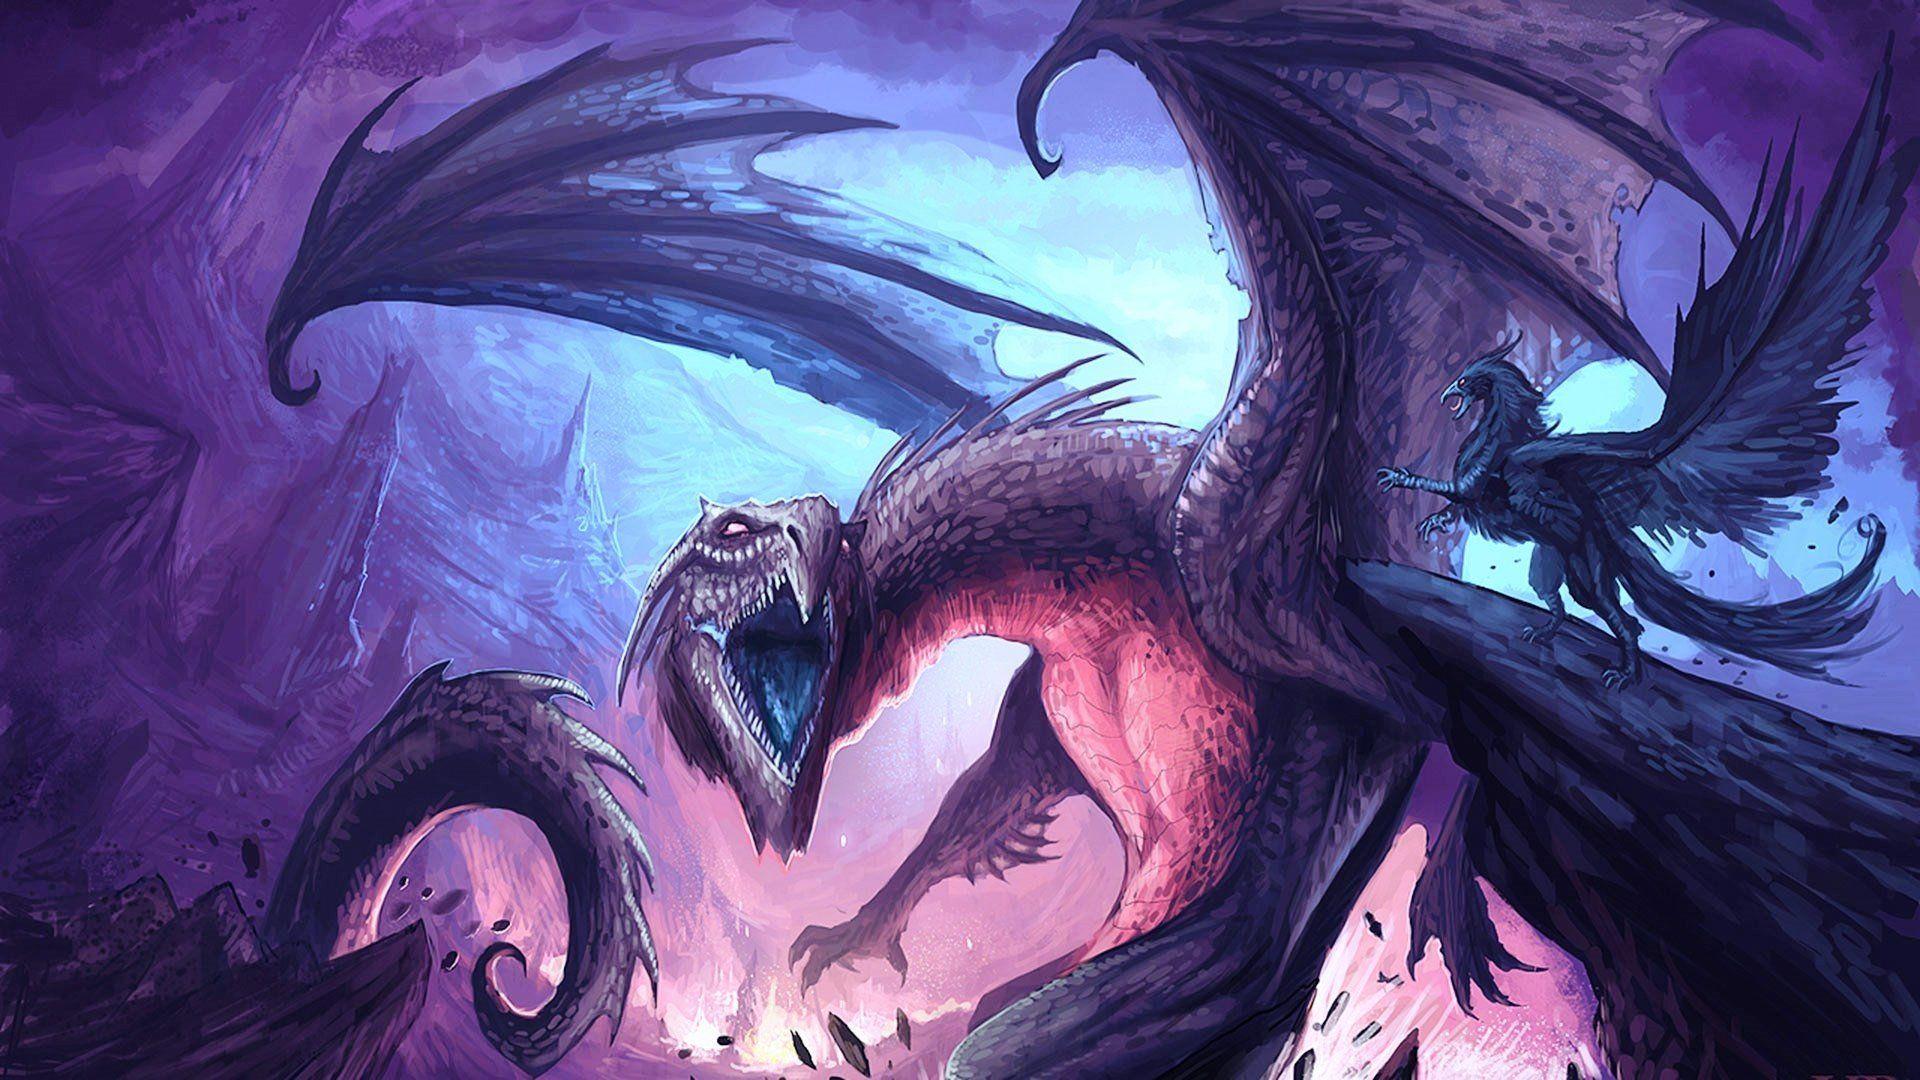 Cool Purple Dragon Wallpapers - Top Free Cool Purple Dragon Backgrounds ...